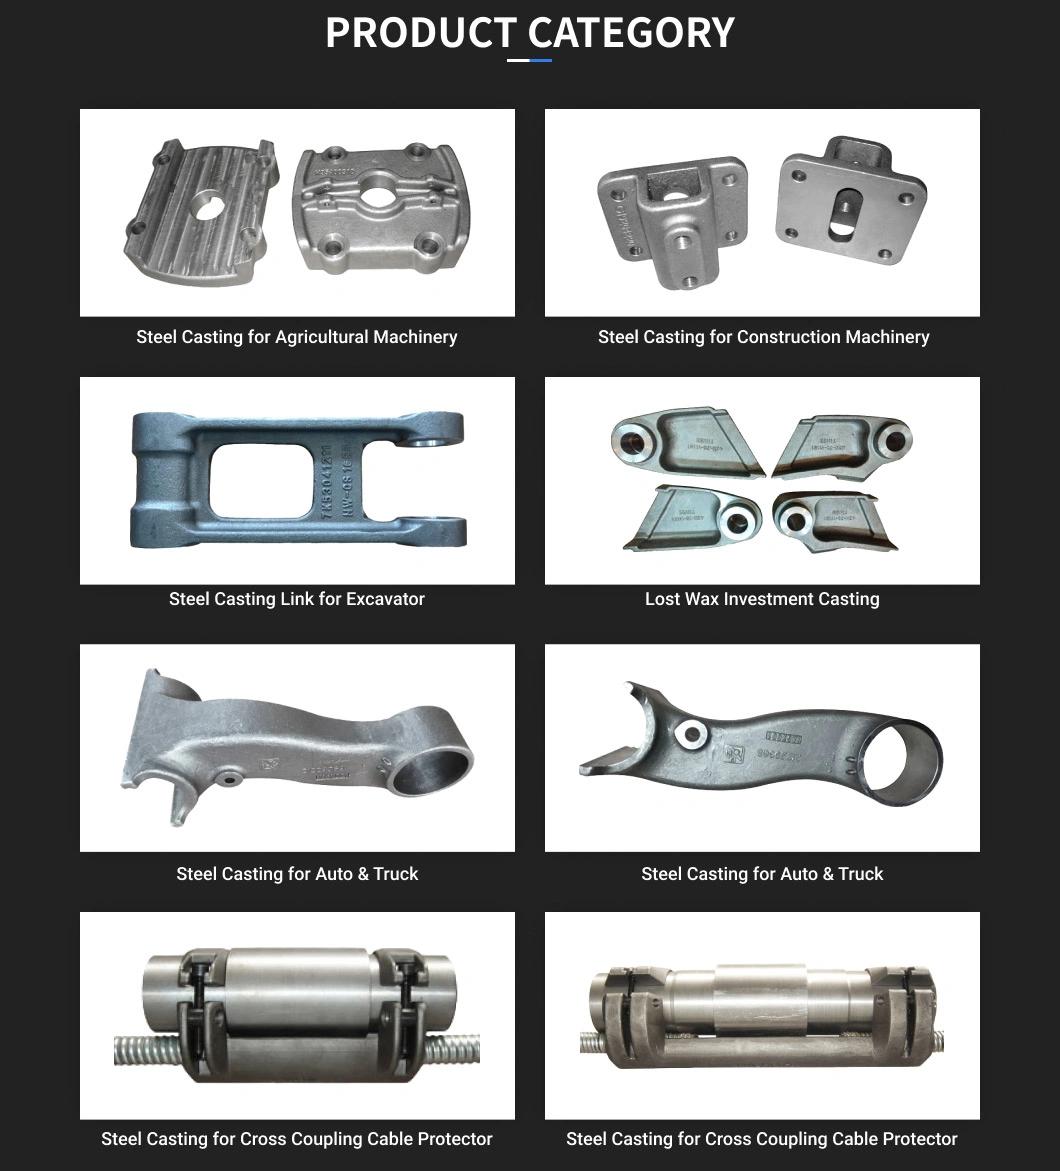 Low Price Brand Lost Wax Method Metal Procision Casting Parts